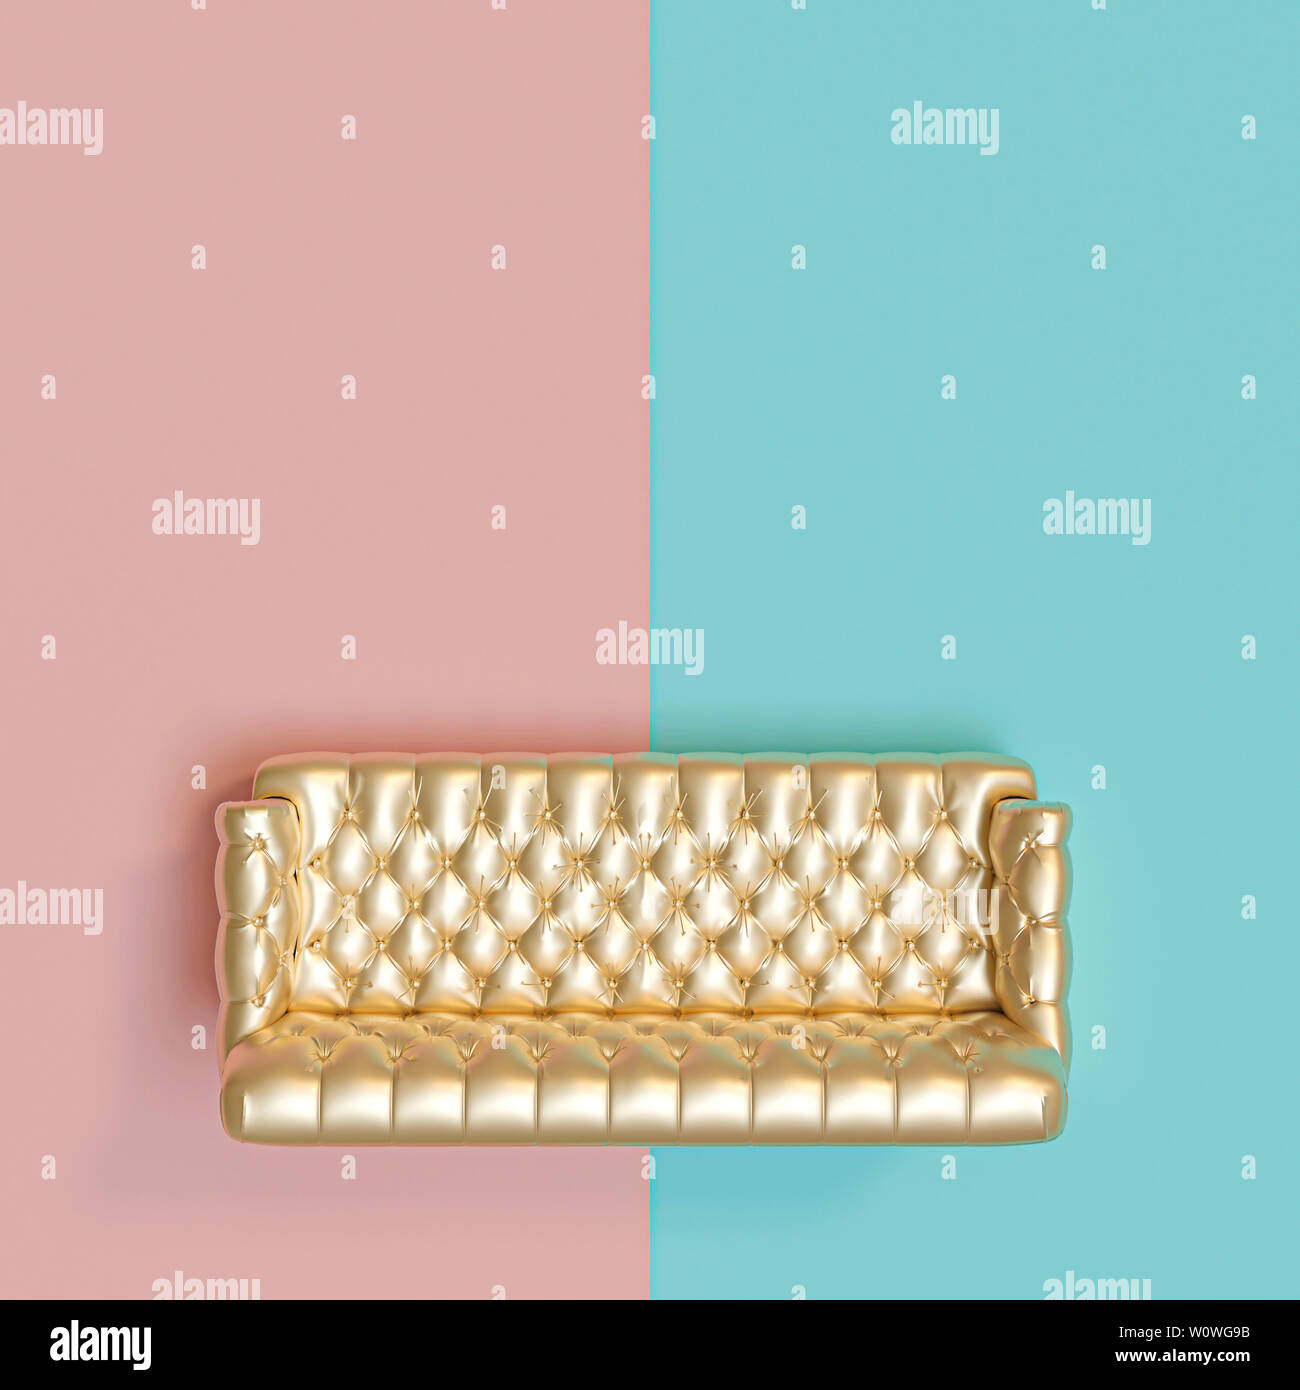 view from the other of a gold-colored tufted sofa on a blue and pink background. 3d image in flat lay render style. Stock Photo